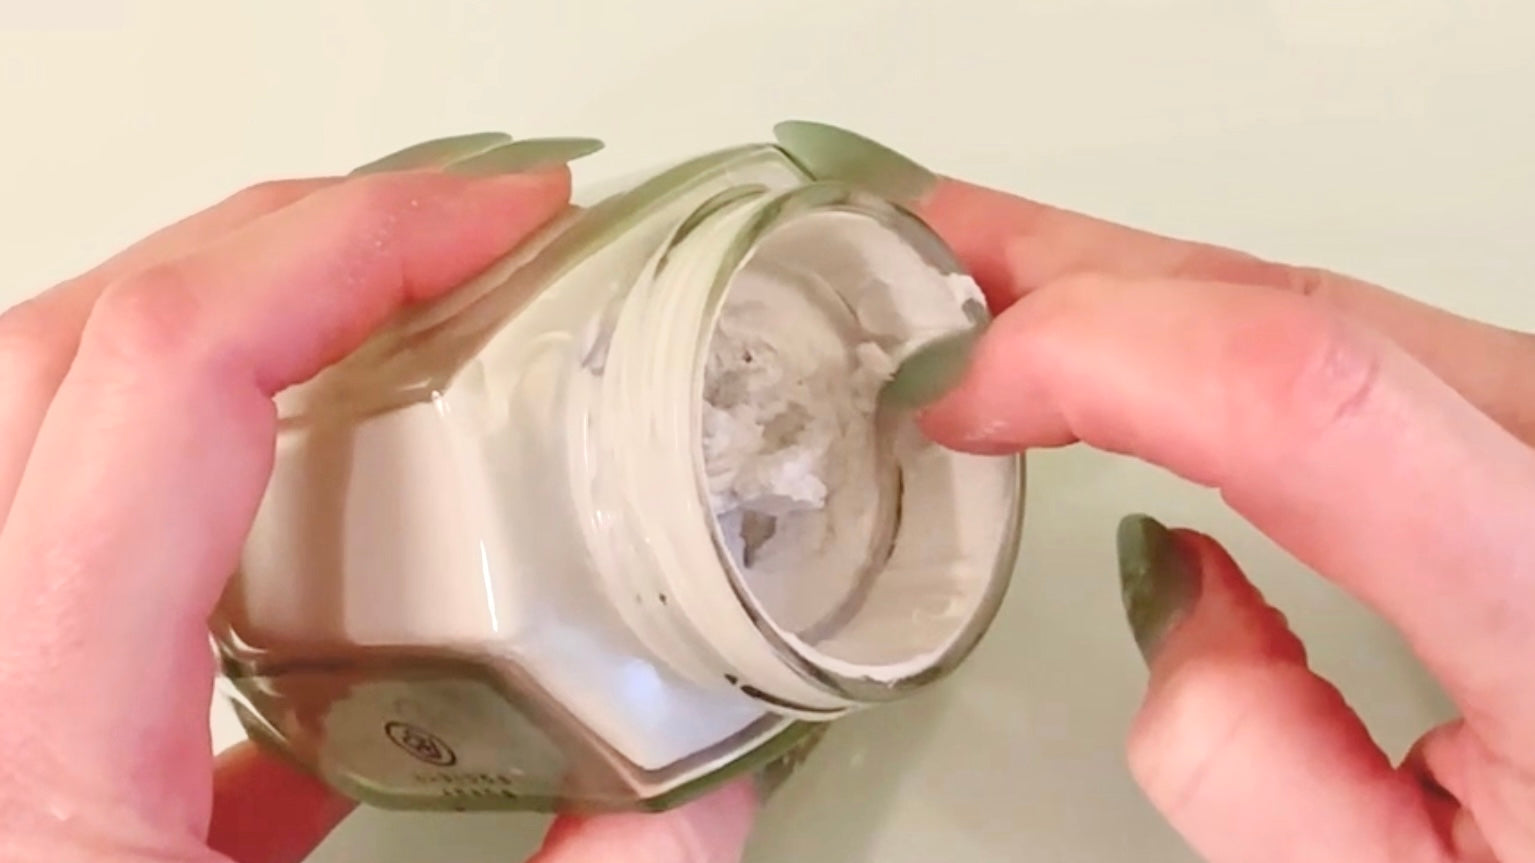 Load video: A short video of the body butter in use